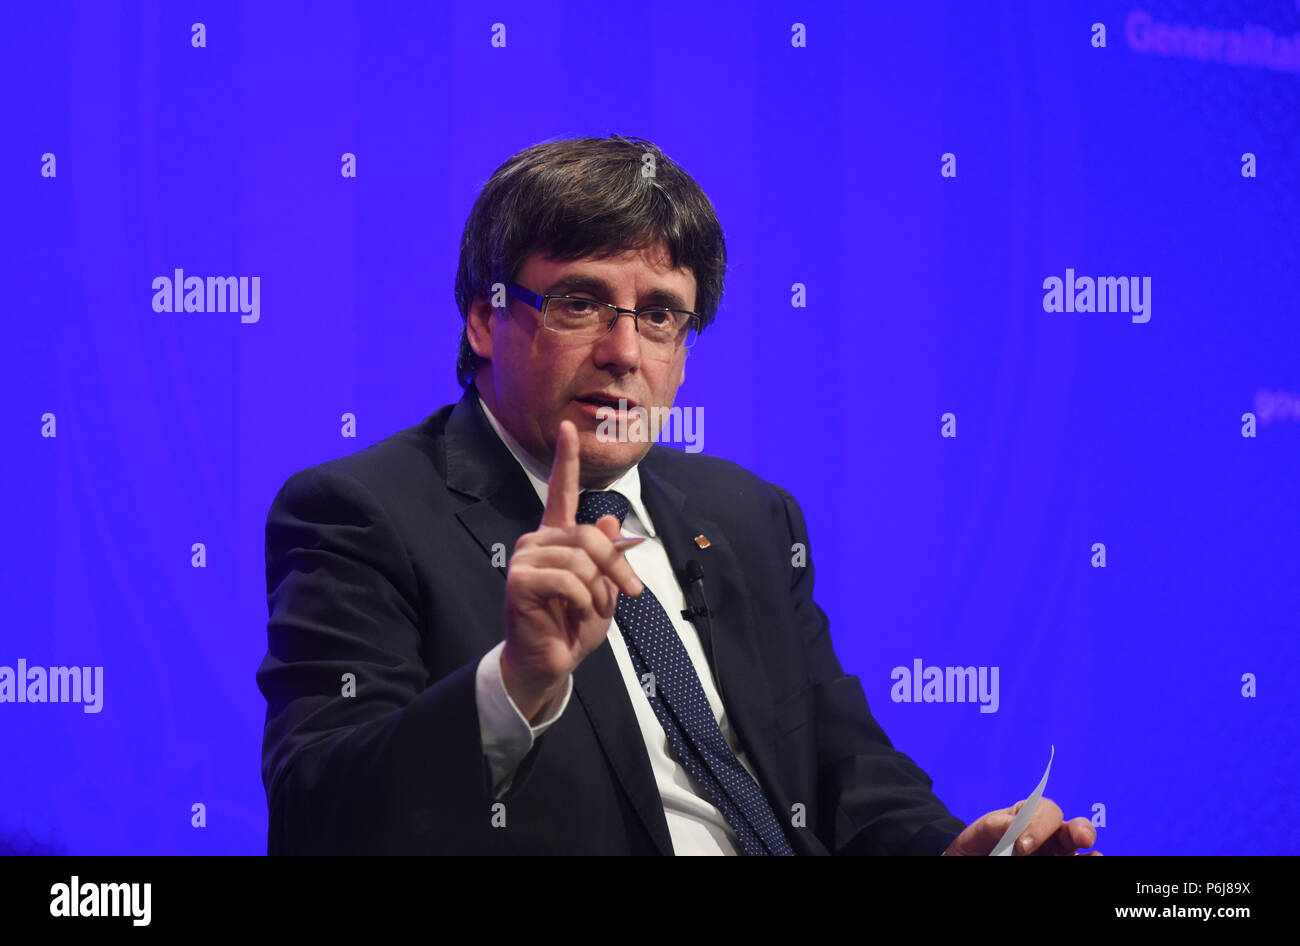 September 11, 2017 - Barcelona, Spain: Catalan president Carles Puigdemont attends a press conference on the morning before hundreds of thousands of Catalans marched for independence during the region's national day, known as the 'Diada'.  Portrait du leader indŽpendantiste catalan Carles Puigdemont lors d'une conference de presse au Palais de la Generalite, siege du gouvernement catalan a Barcelone.*** FRANCE OUT / NO SALES TO FRENCH MEDIA *** Stock Photo